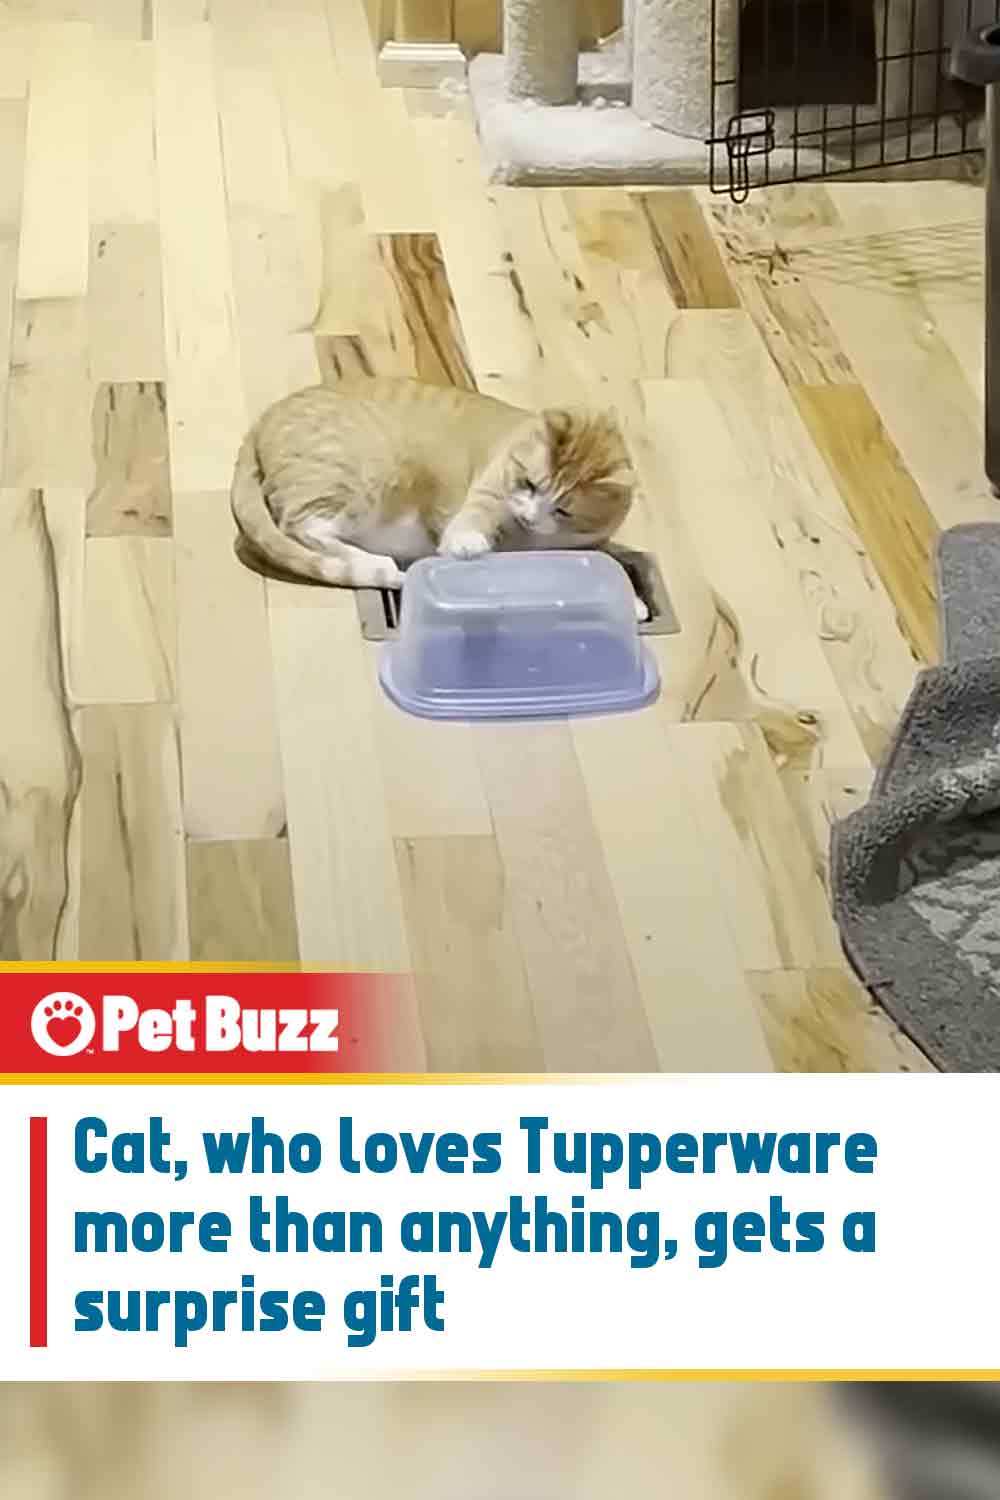 Cat, who loves Tupperware more than anything, gets a surprise gift